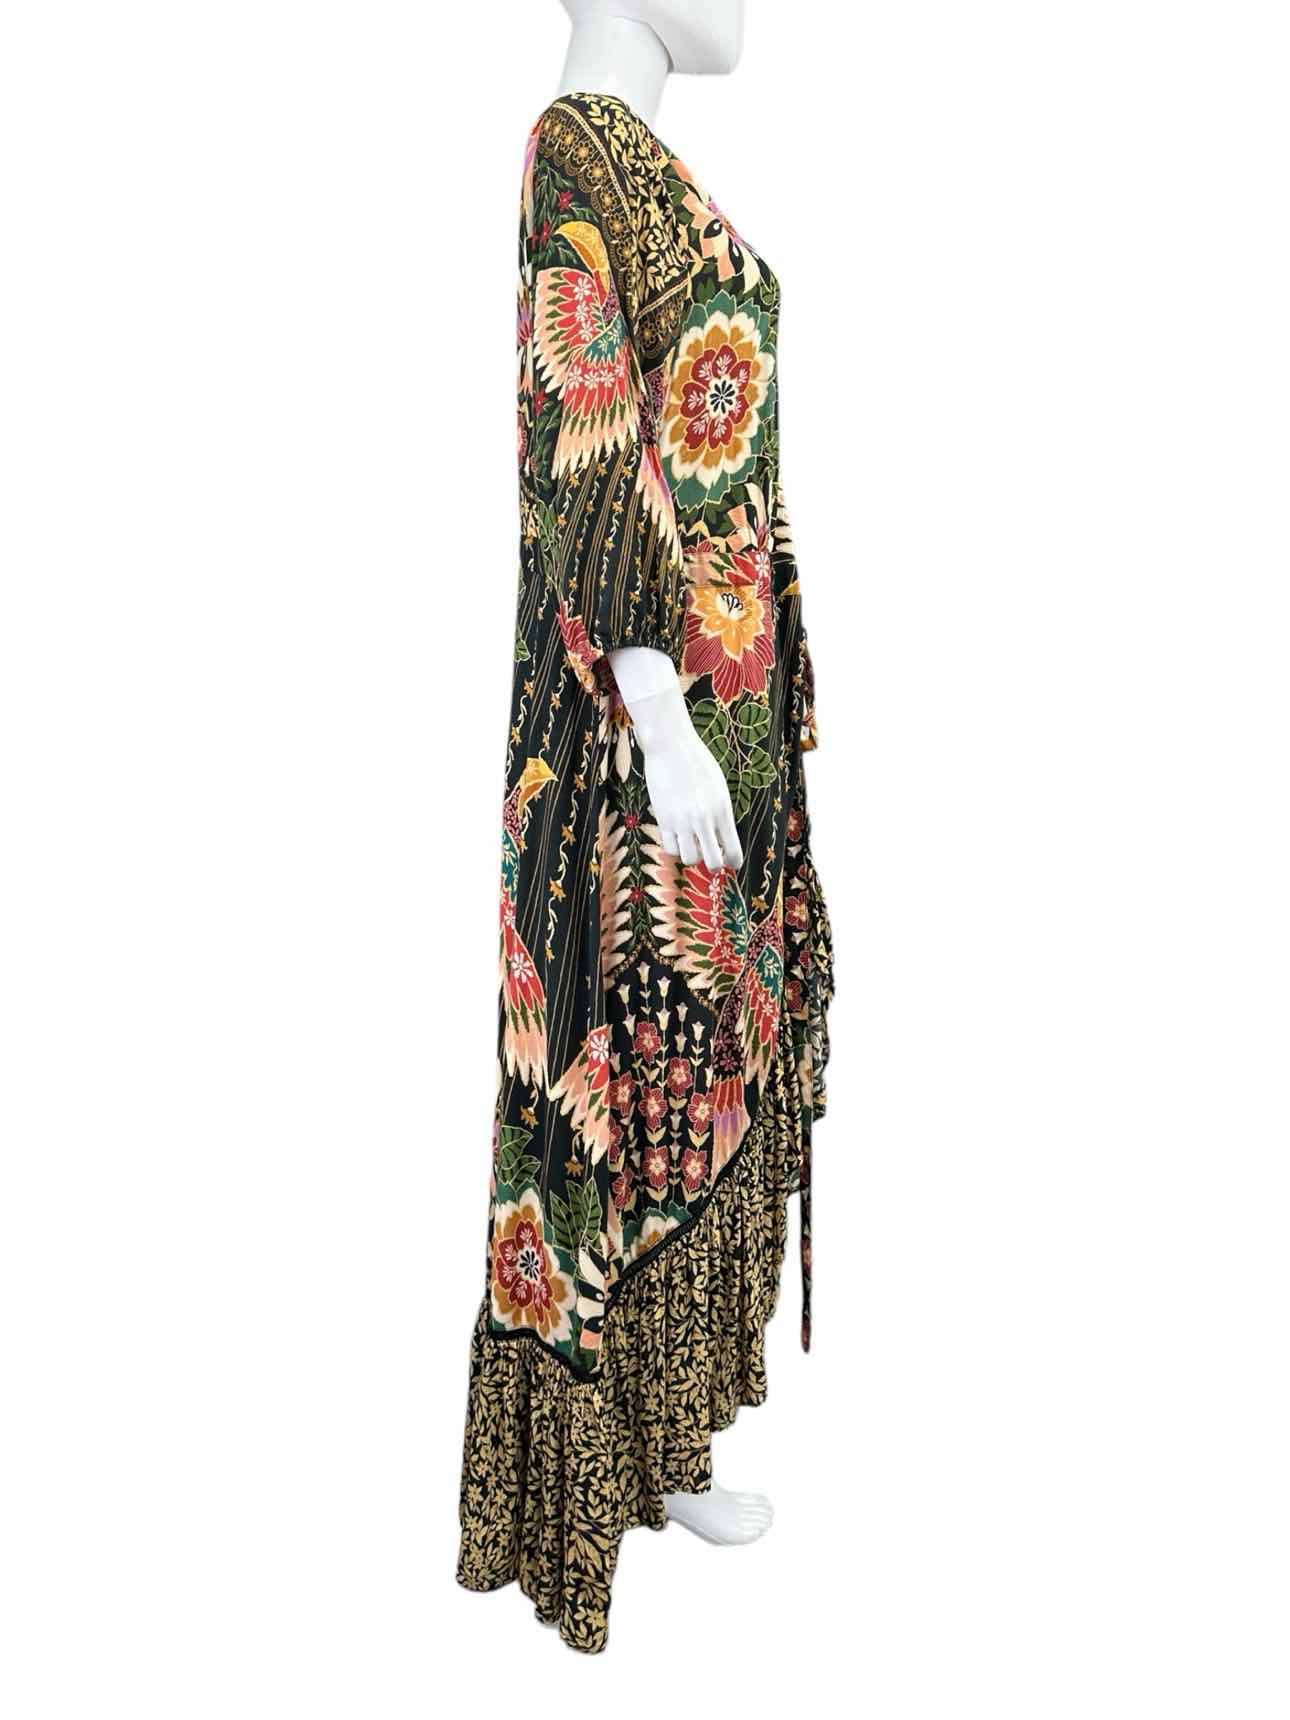 FARM for Anthropologie Black Floral Pattern Duster Size XL